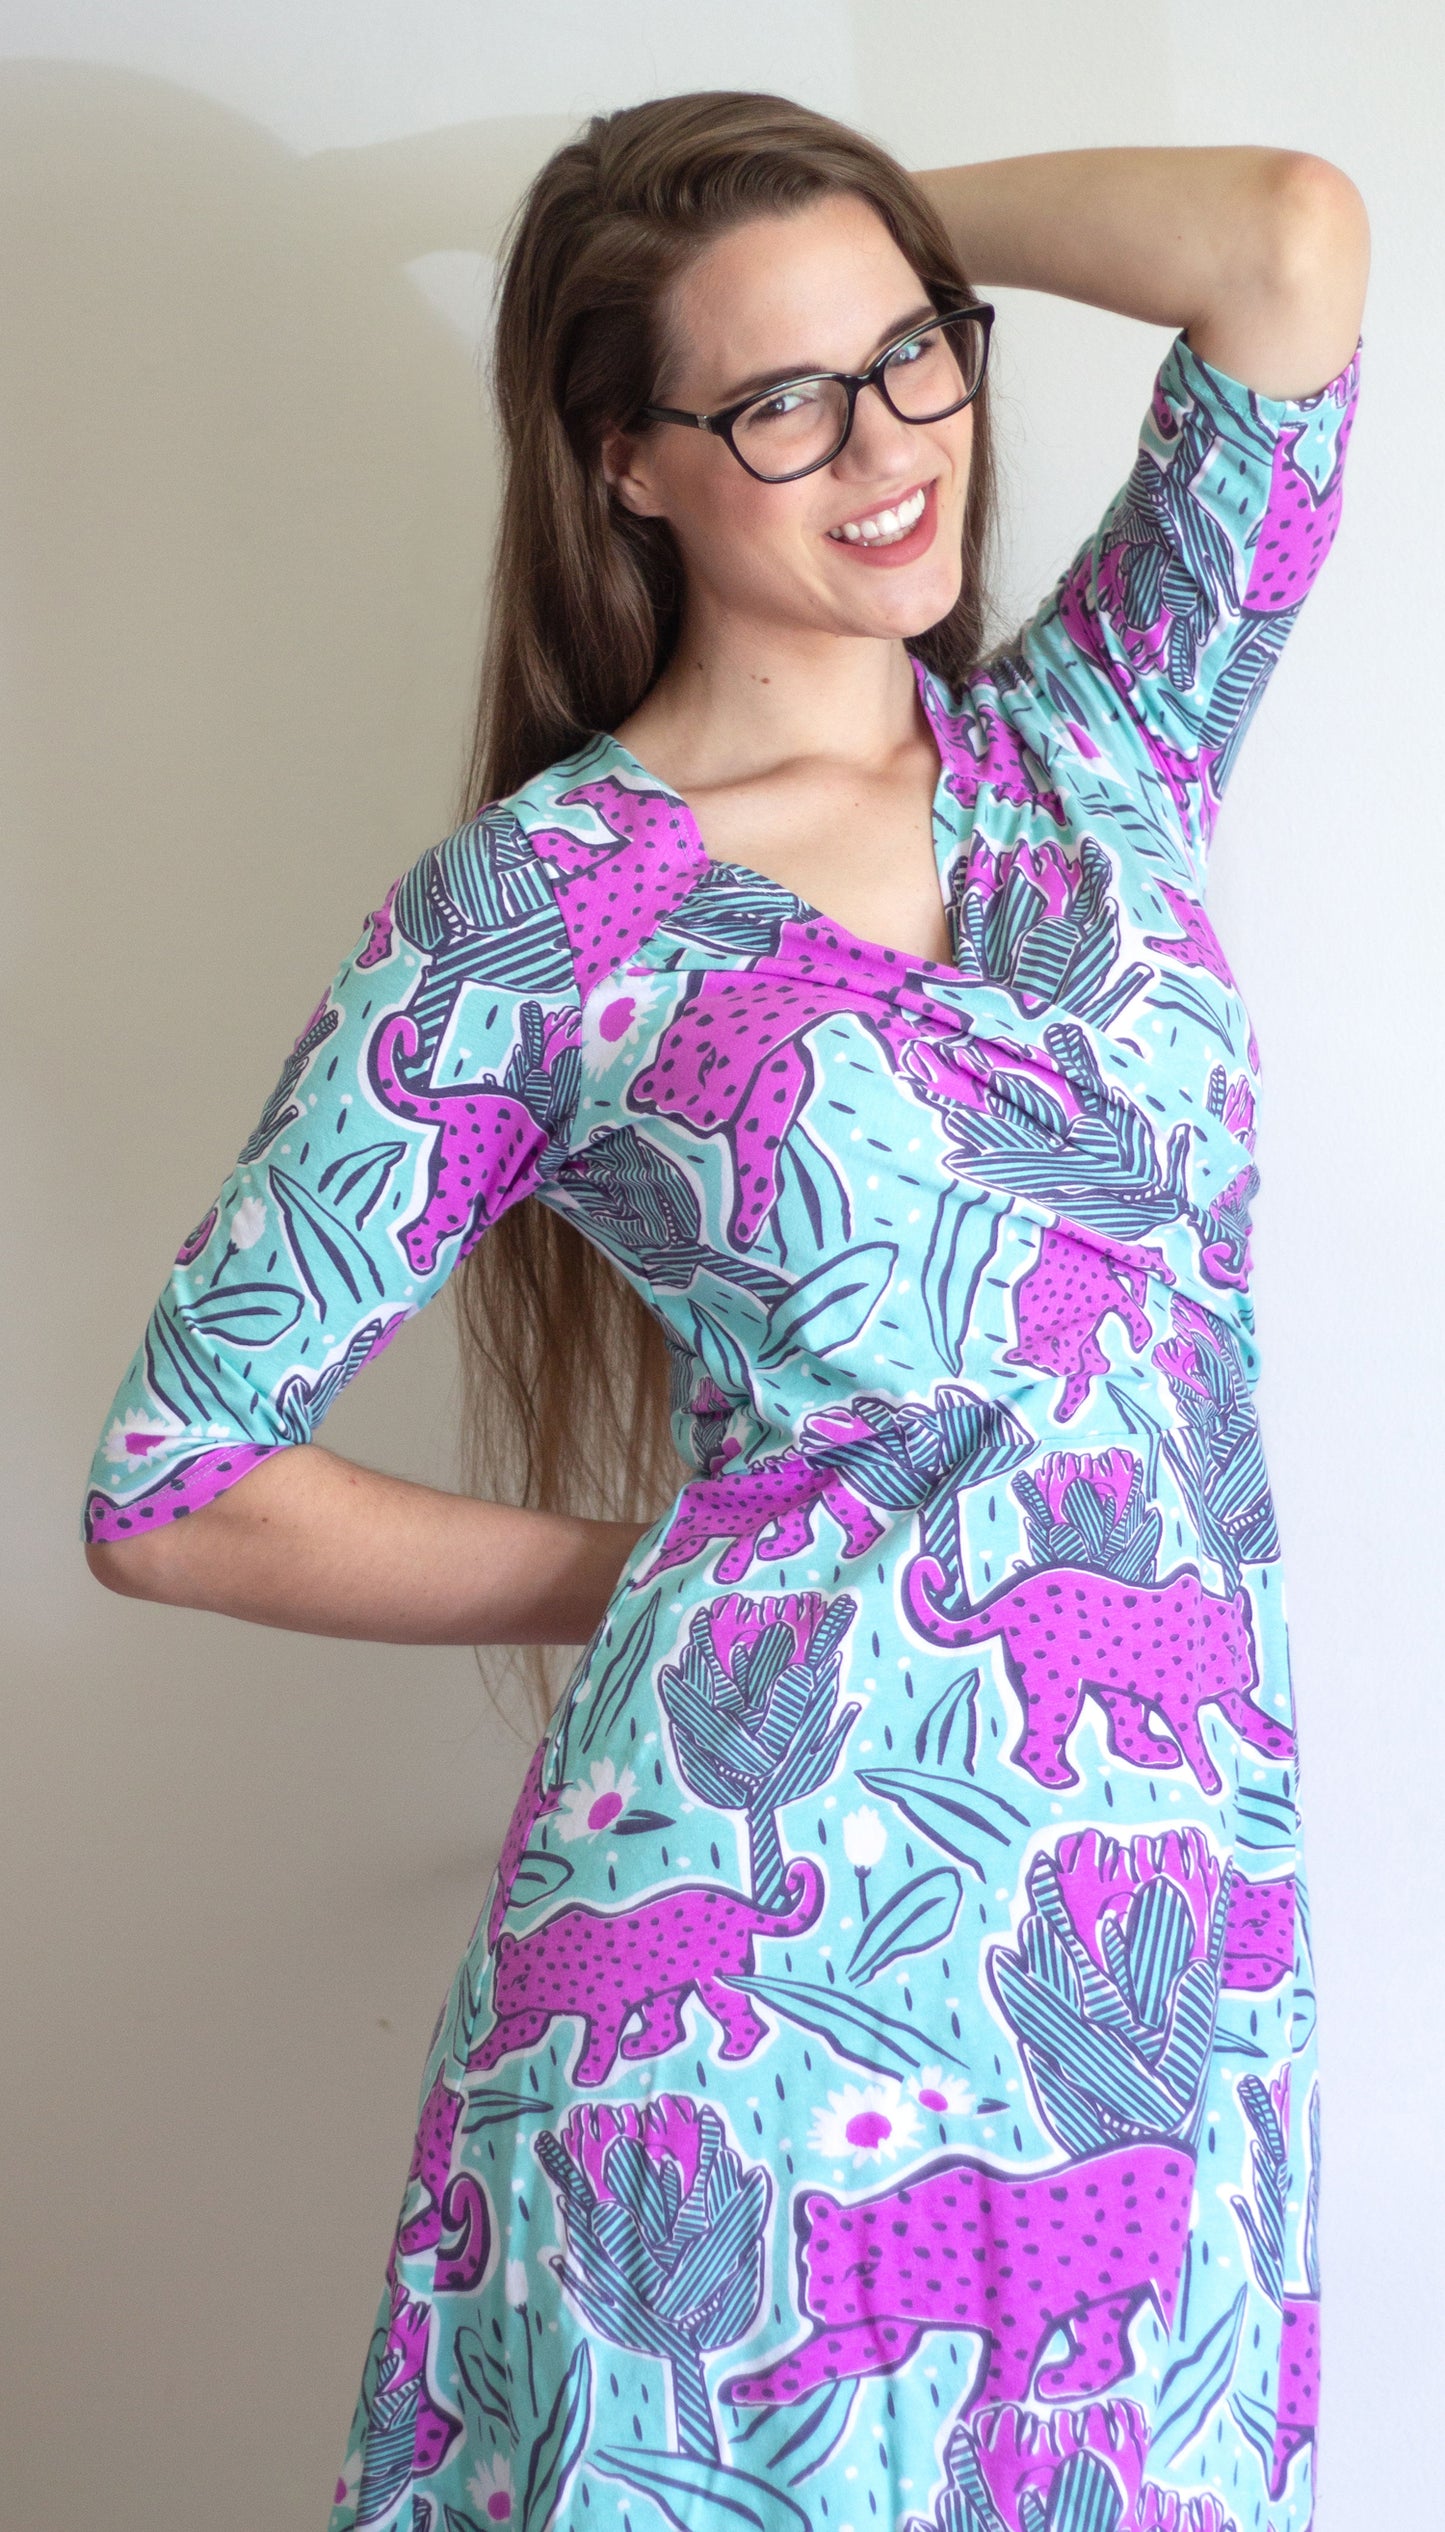 Orchid pink and mint green jaguar and protea flower print wrap dress with sleeves on long-haired model